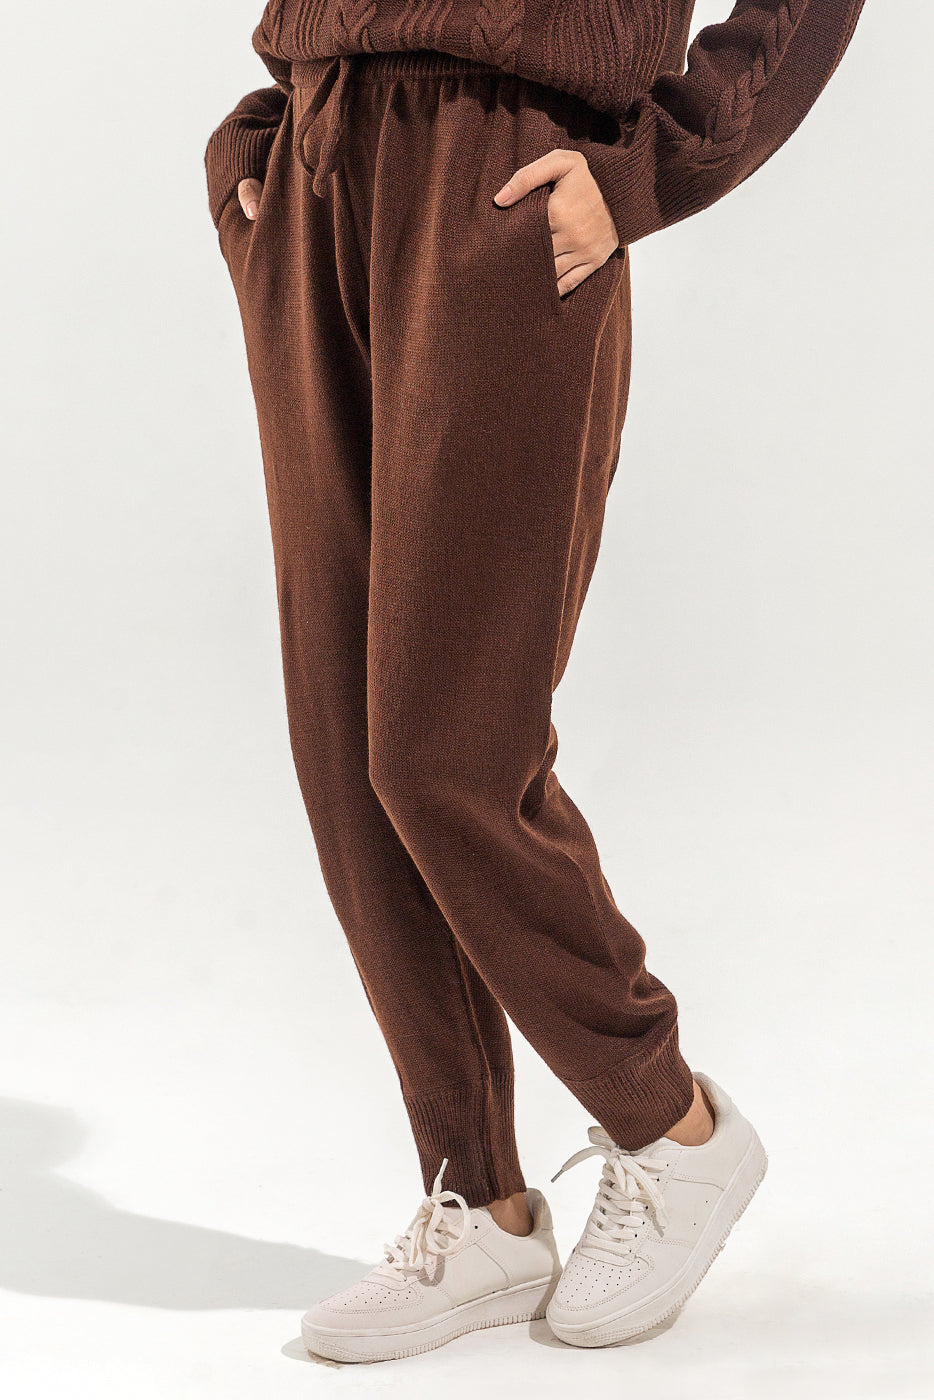 Knitted Jogger Pants - BEECHTREE